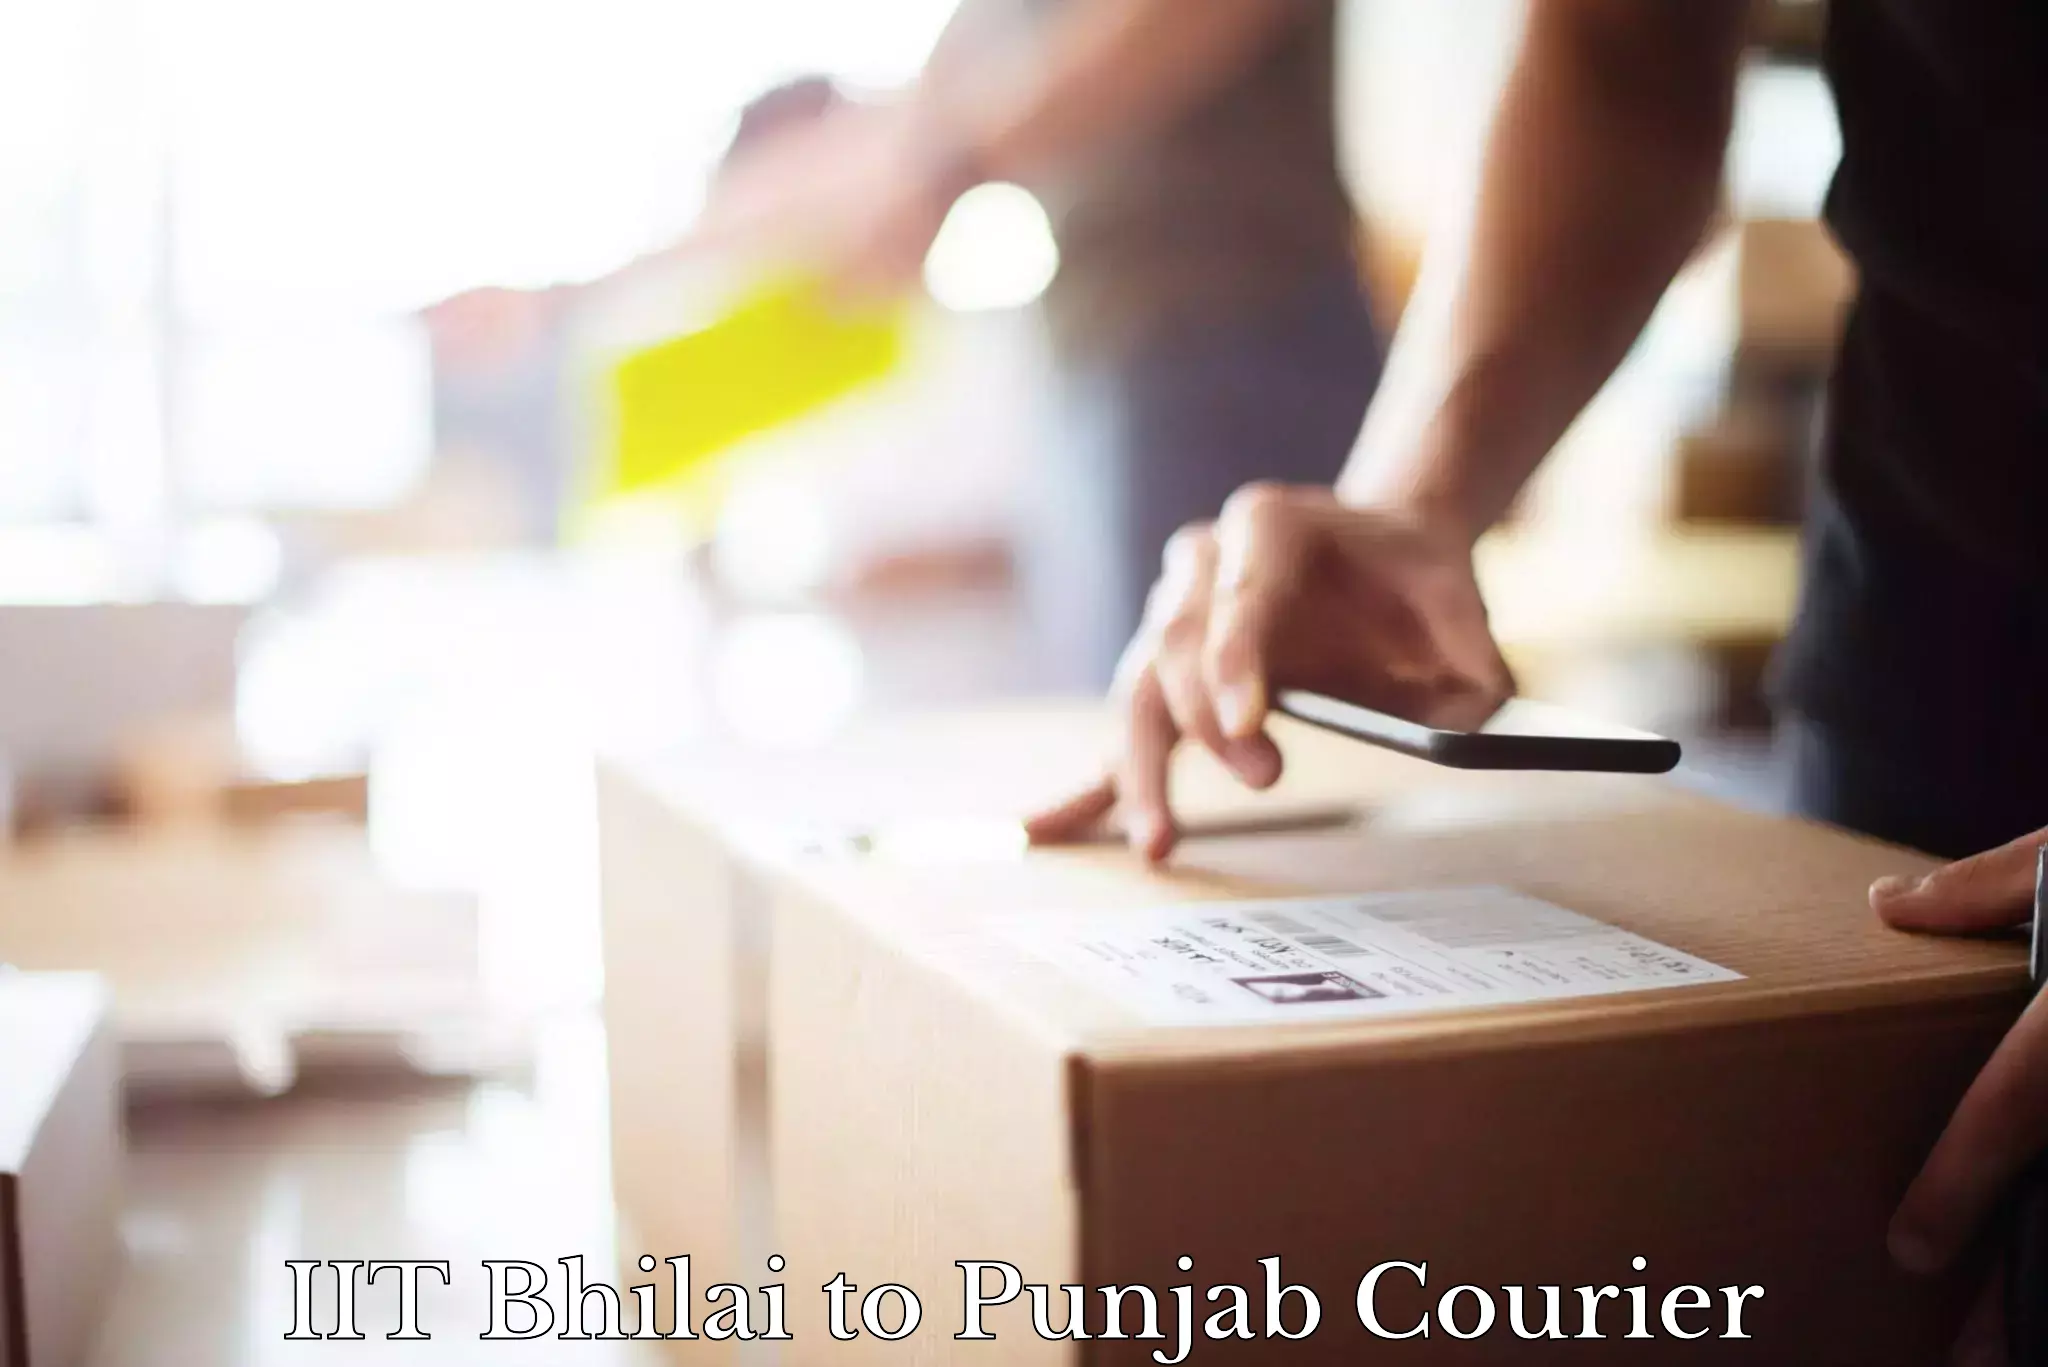 Subscription-based courier IIT Bhilai to Talwara